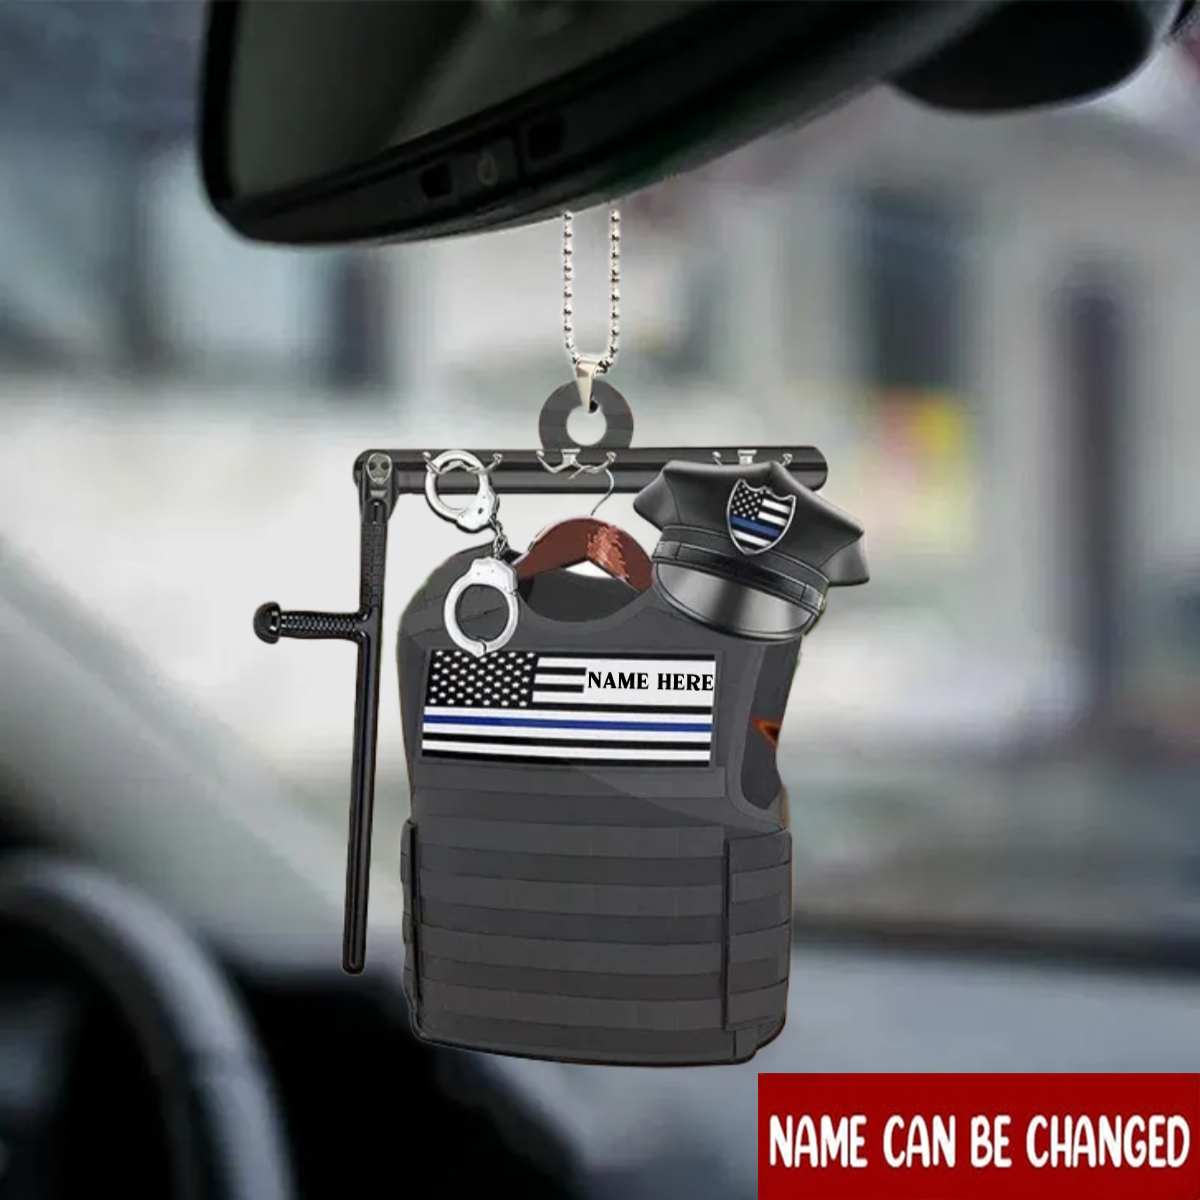 Police Vest Personalized Shaped Acrylic Ornament Interior For Car/ Auto Ornament/ Gift For New Cars